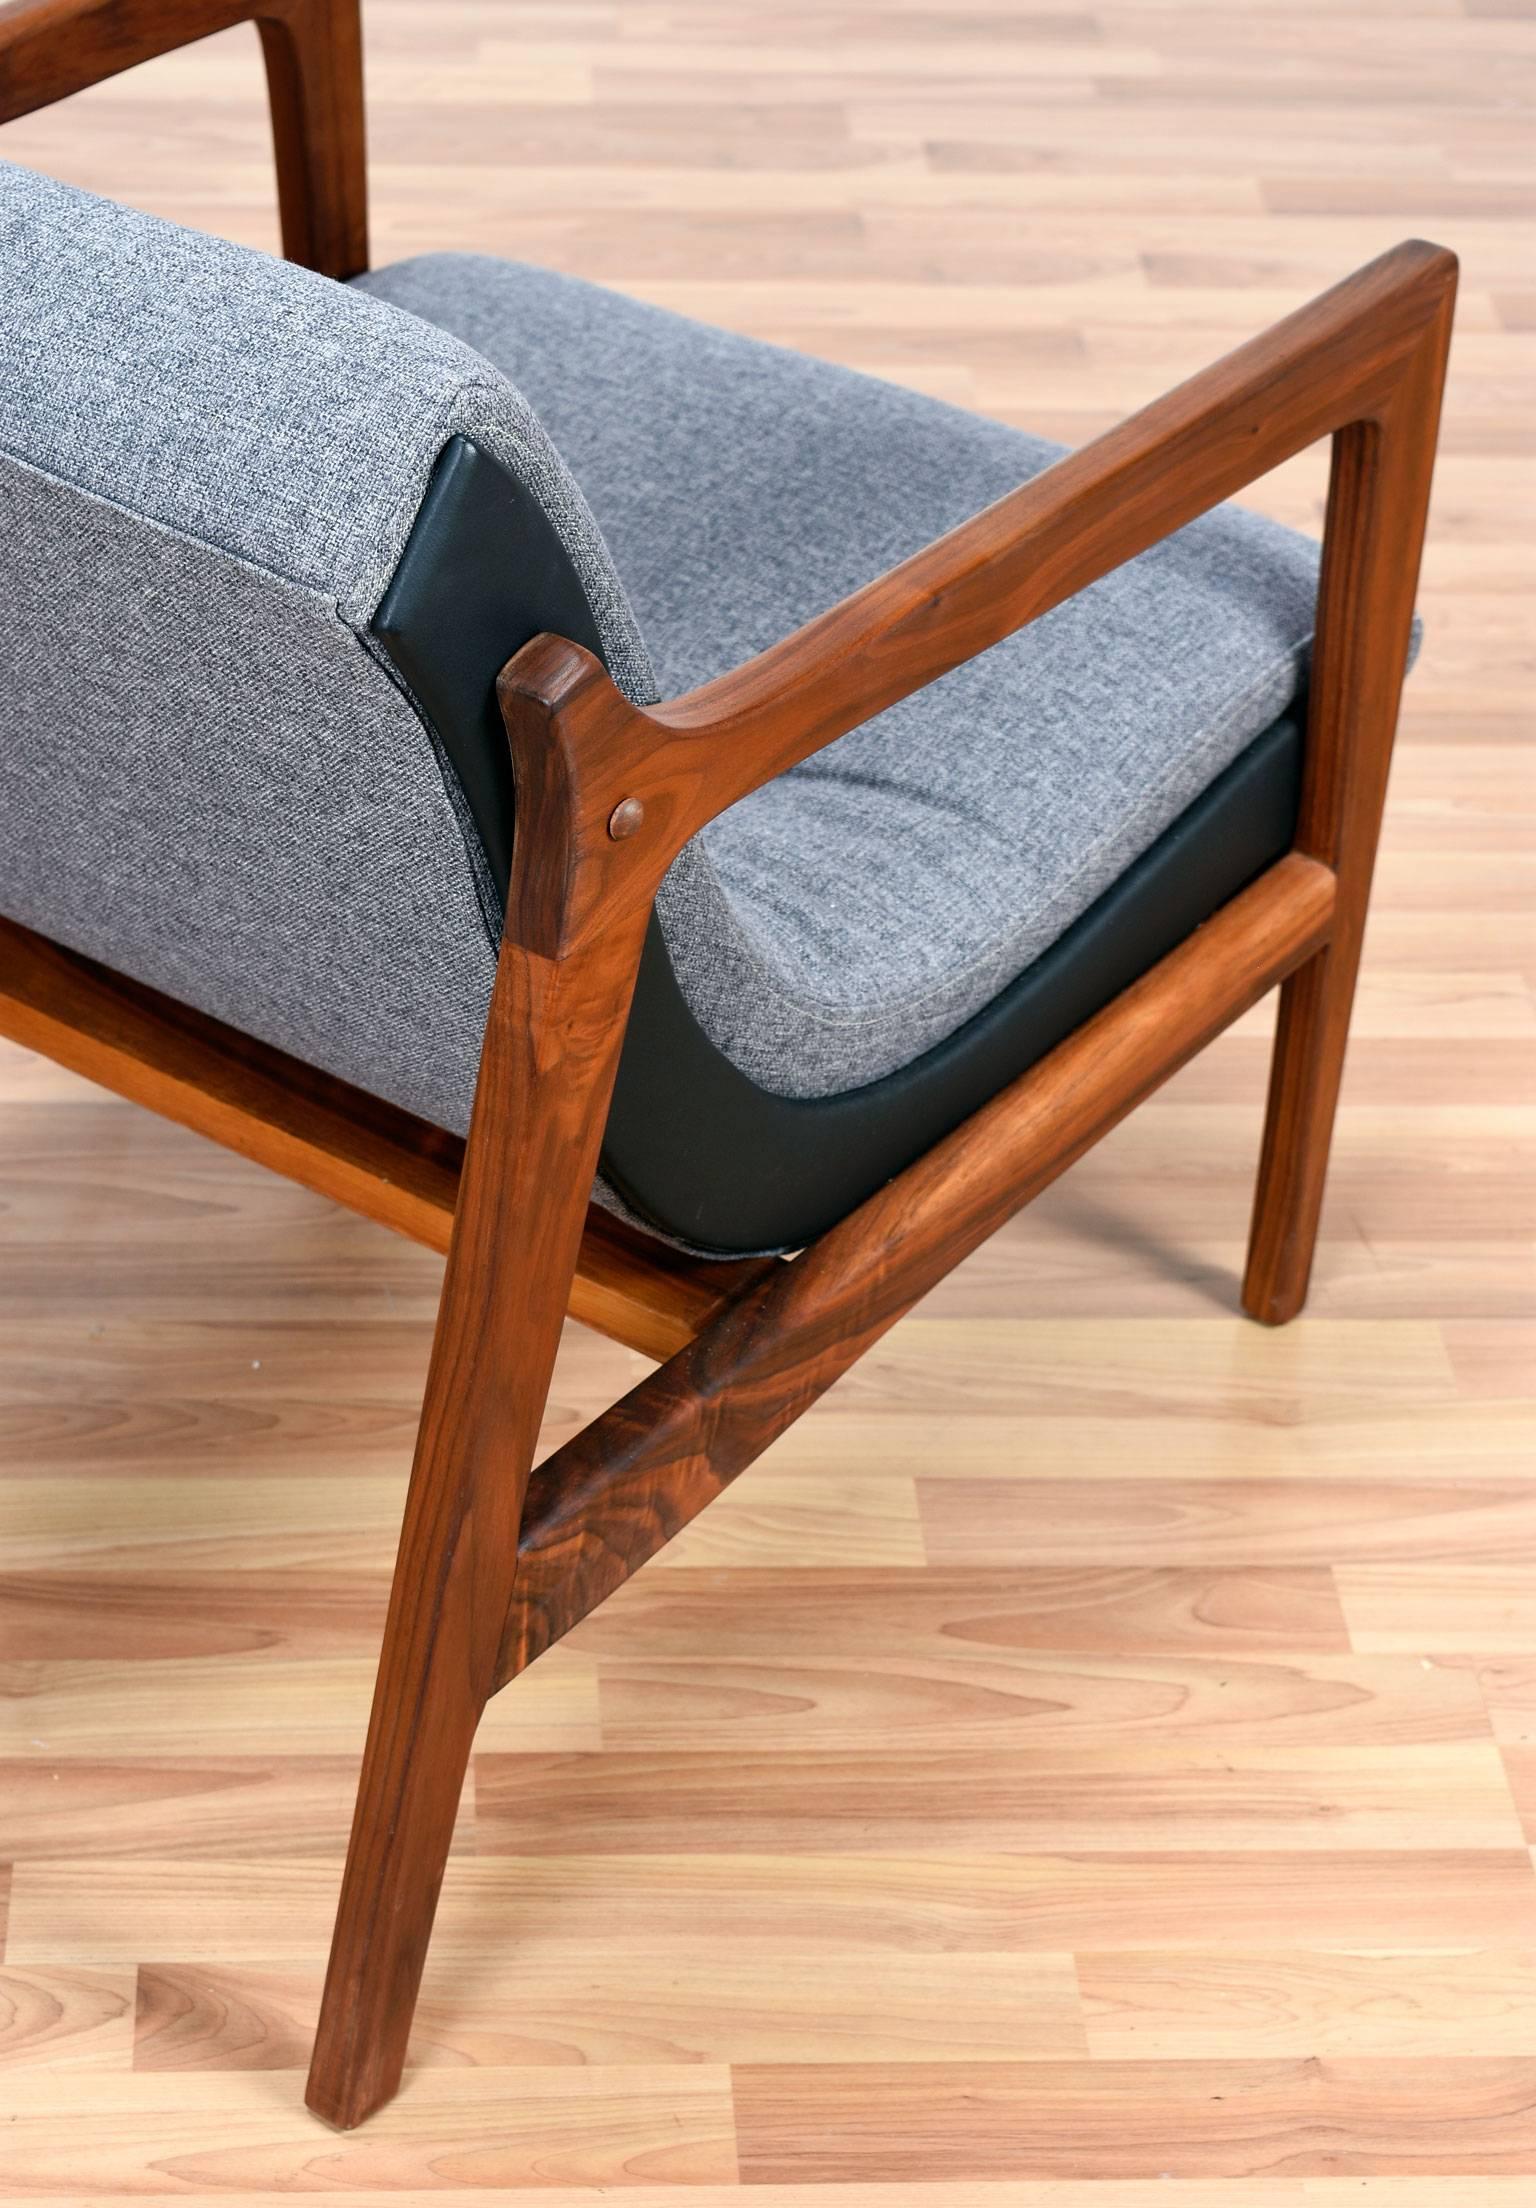 Upholstery Restored Duo Tone Mid-Century Modern Scoop Chair